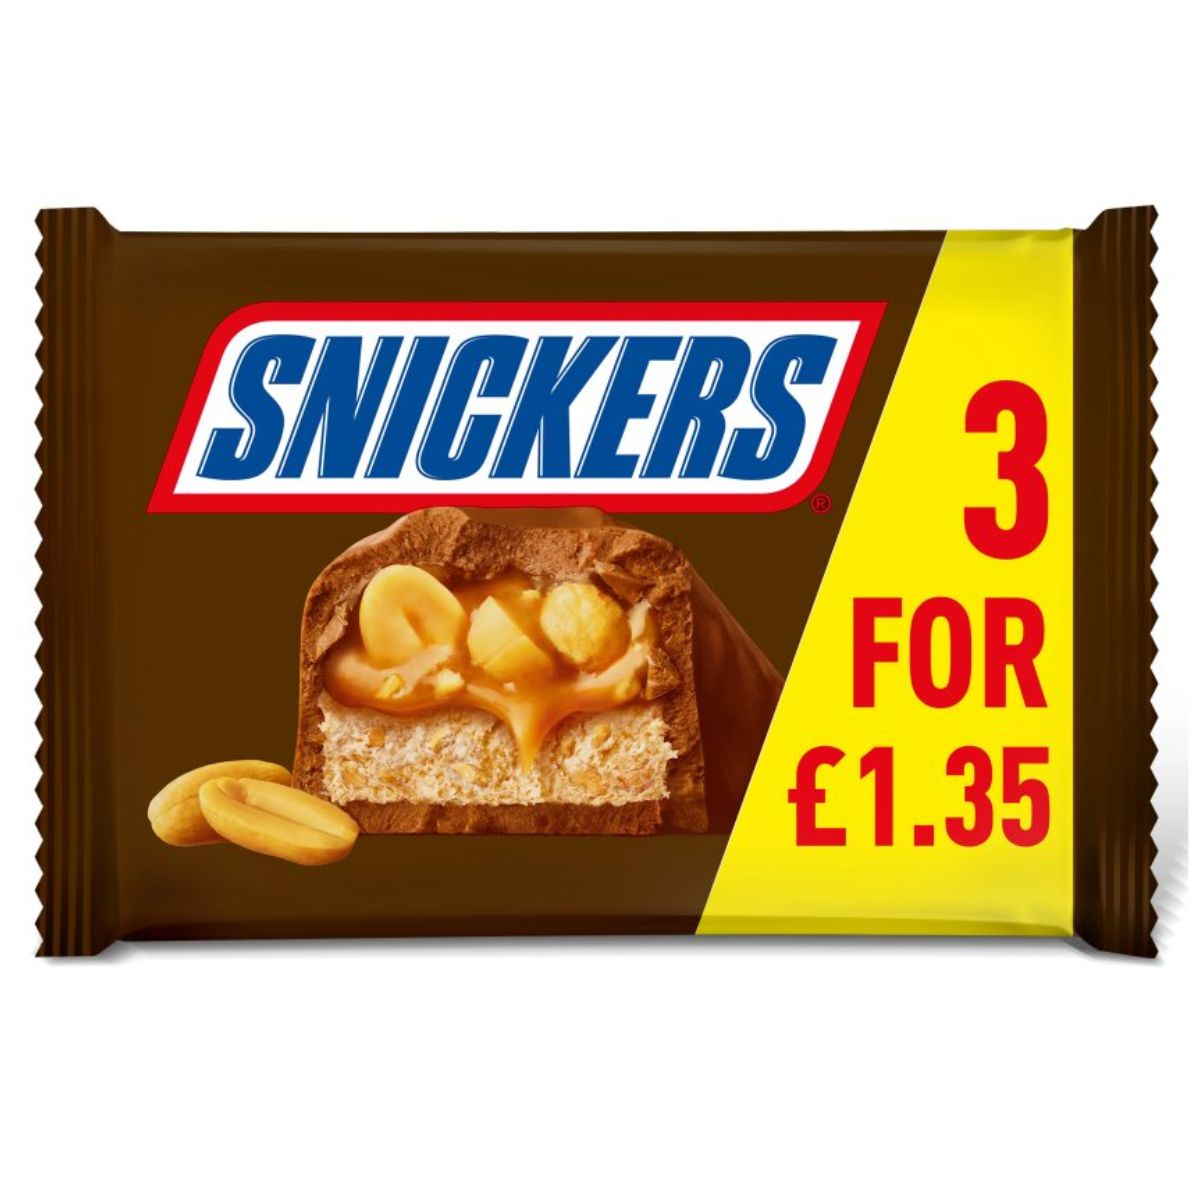 Pack of three Snickers - Chocolate Bars Multipack - 3 x 41.7g with a promotional price label, showing the candy cut open to reveal the nougat, caramel, and peanuts inside.